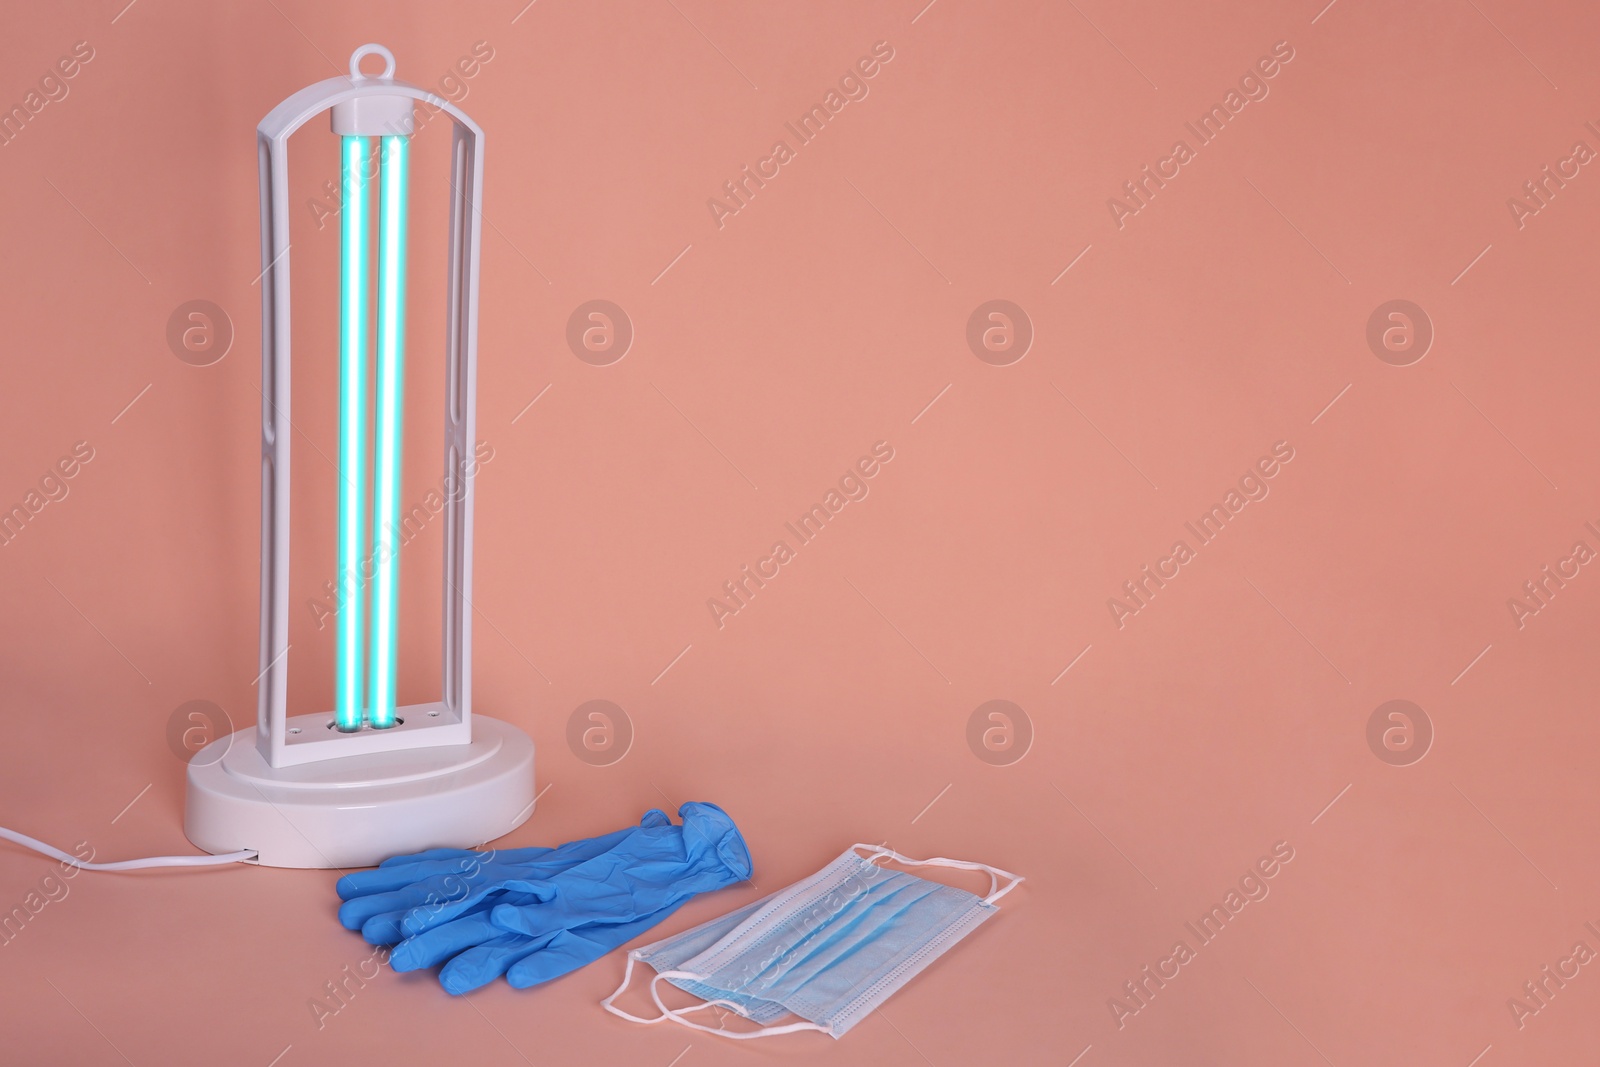 Photo of Ultraviolet lamp, medical masks and gloves on peach background, space for text